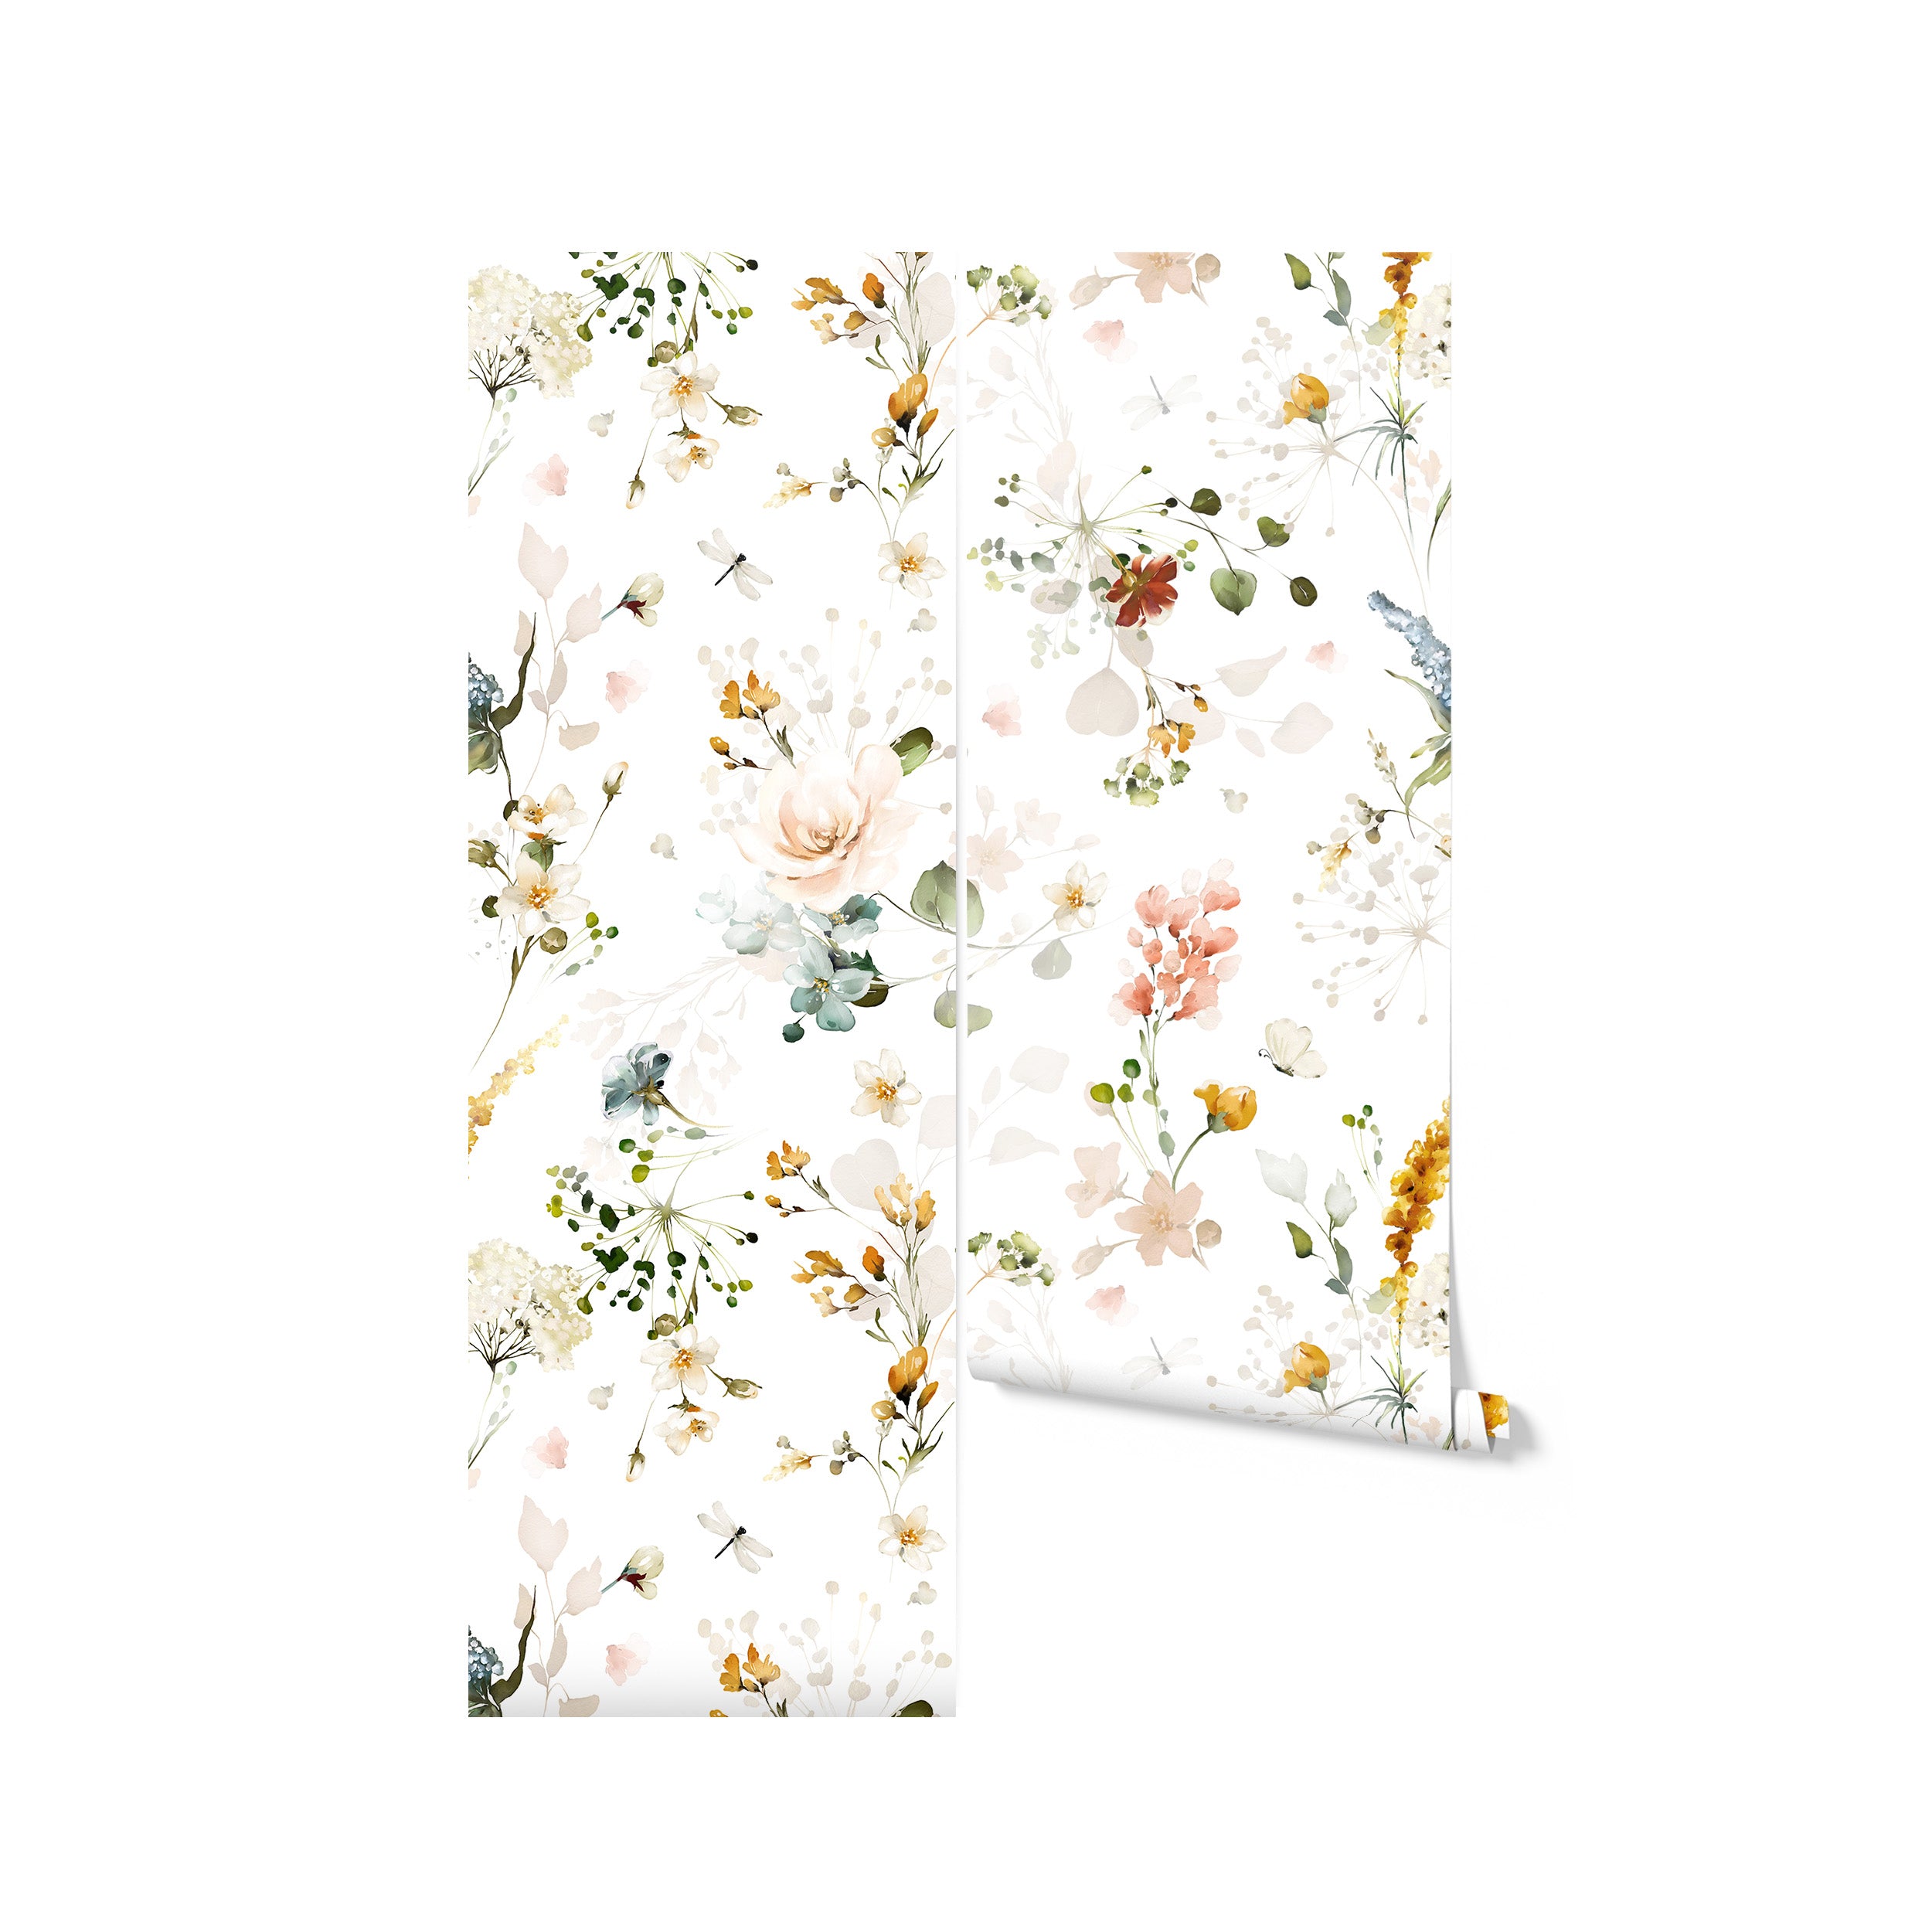 A roll of Fiori Wallpaper, partially unrolled to show the intricate and colorful floral designs that make this wallpaper ideal for adding a touch of elegance and freshness to any interior space.